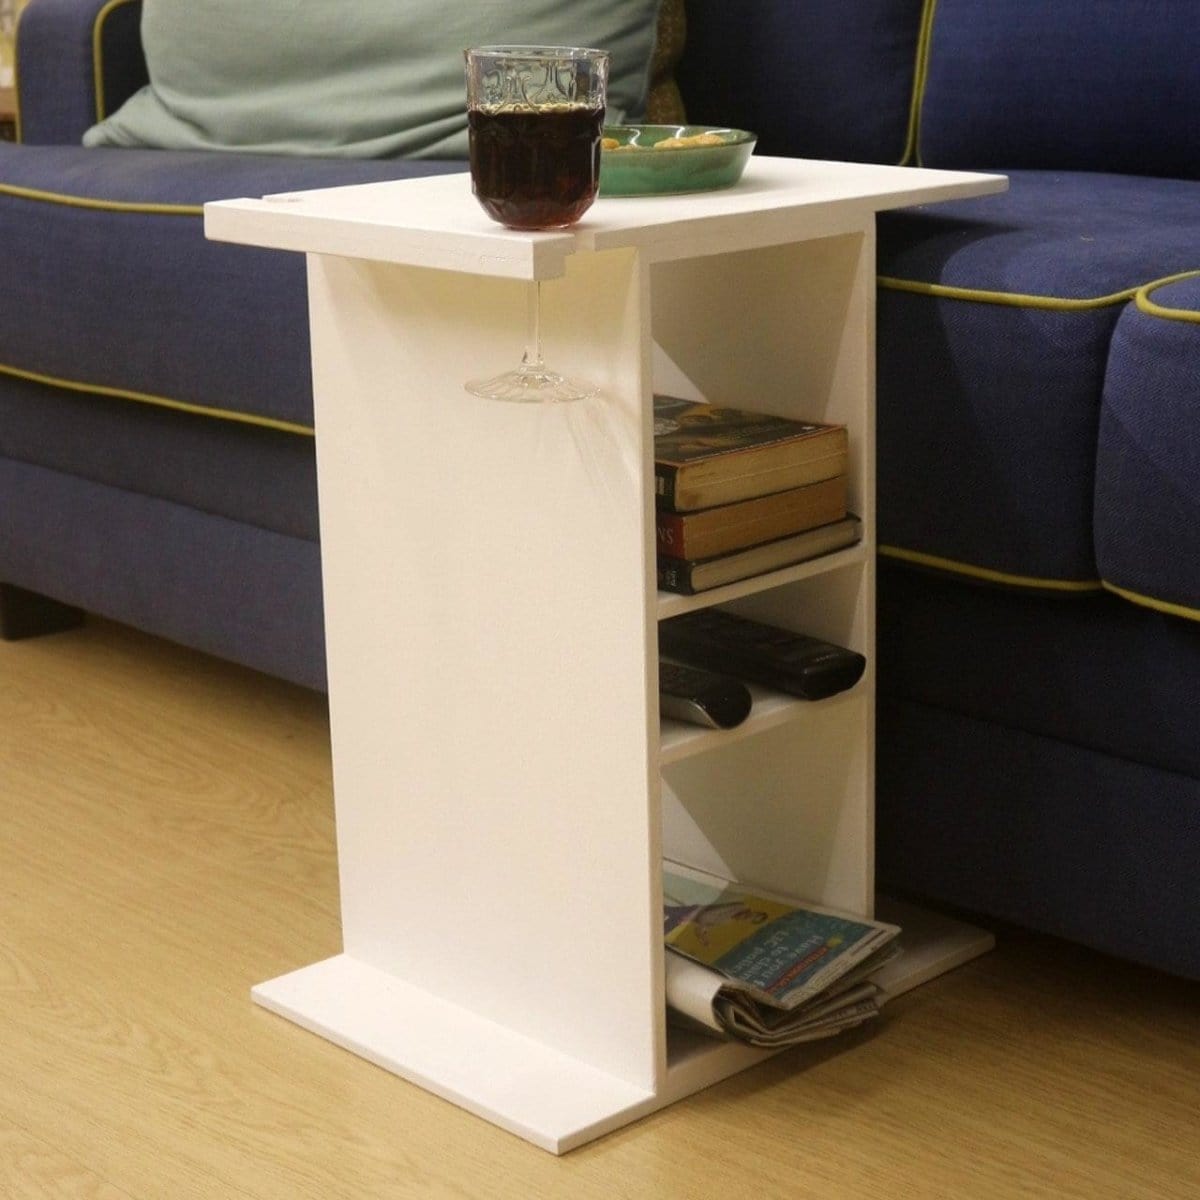 Barish Sofa Table Centre Stand (With Space for your Wine Glass) White BH0003WE Best Home Decor Handcrafted